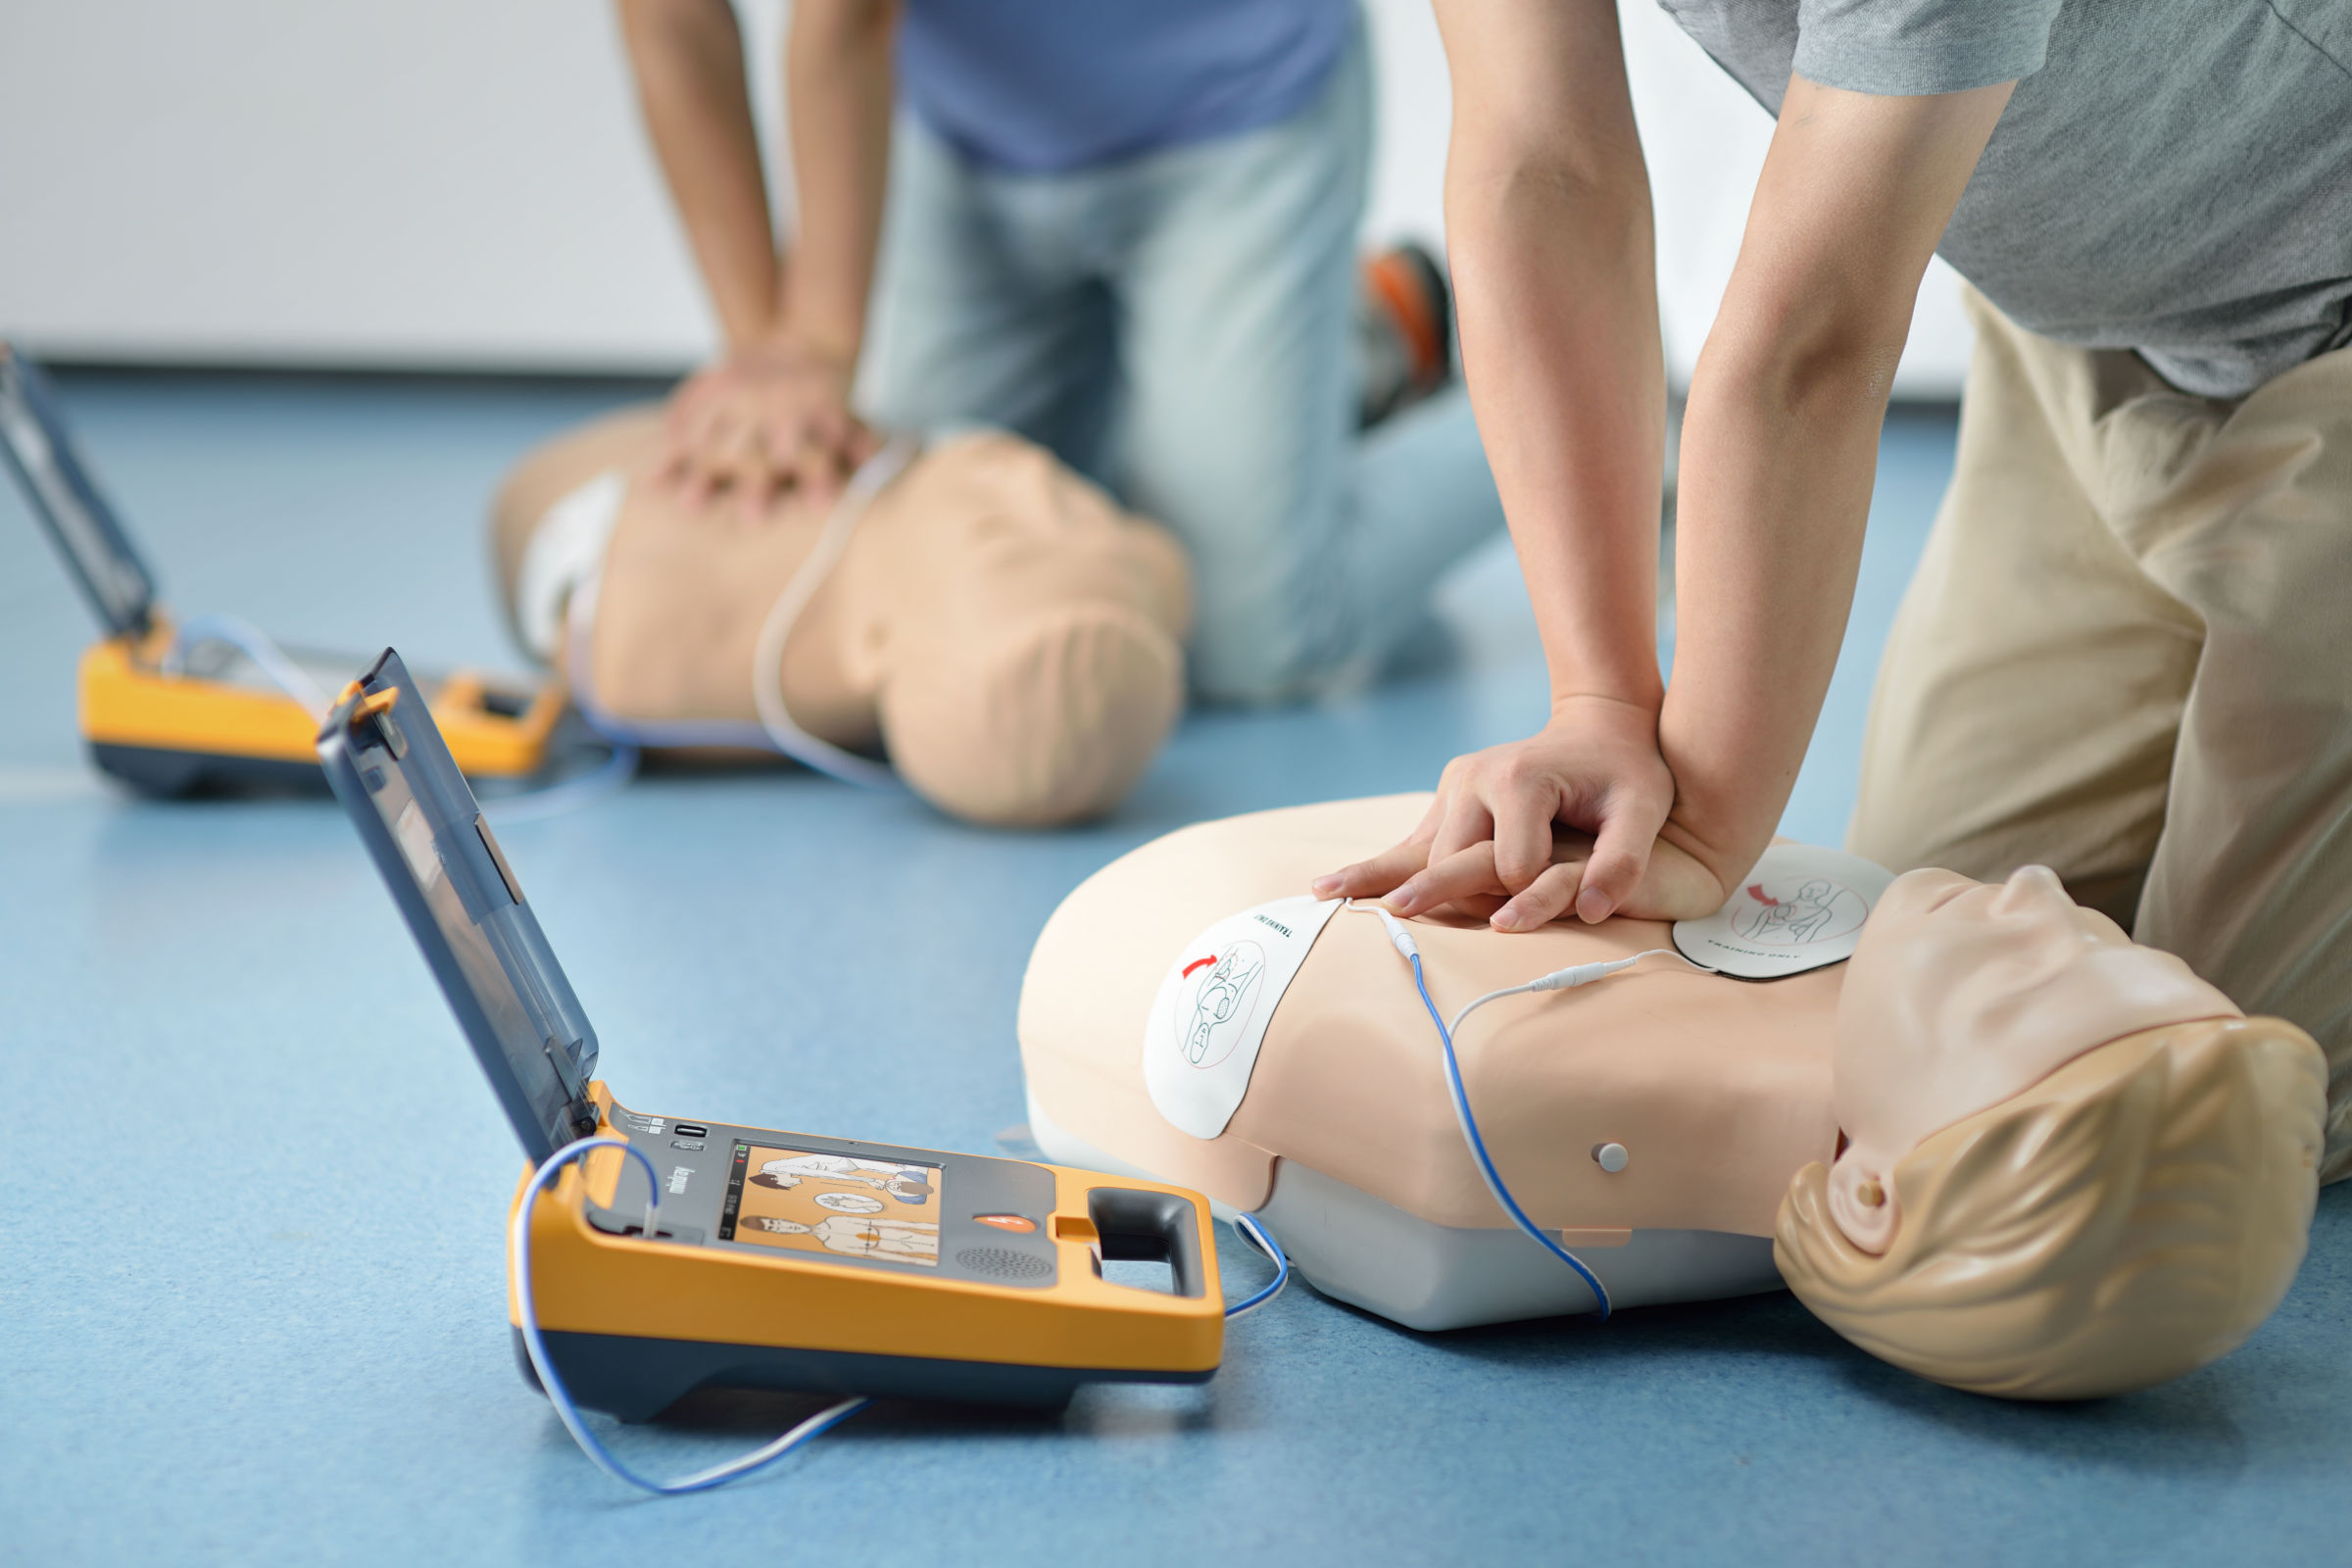 Prevention training using AED